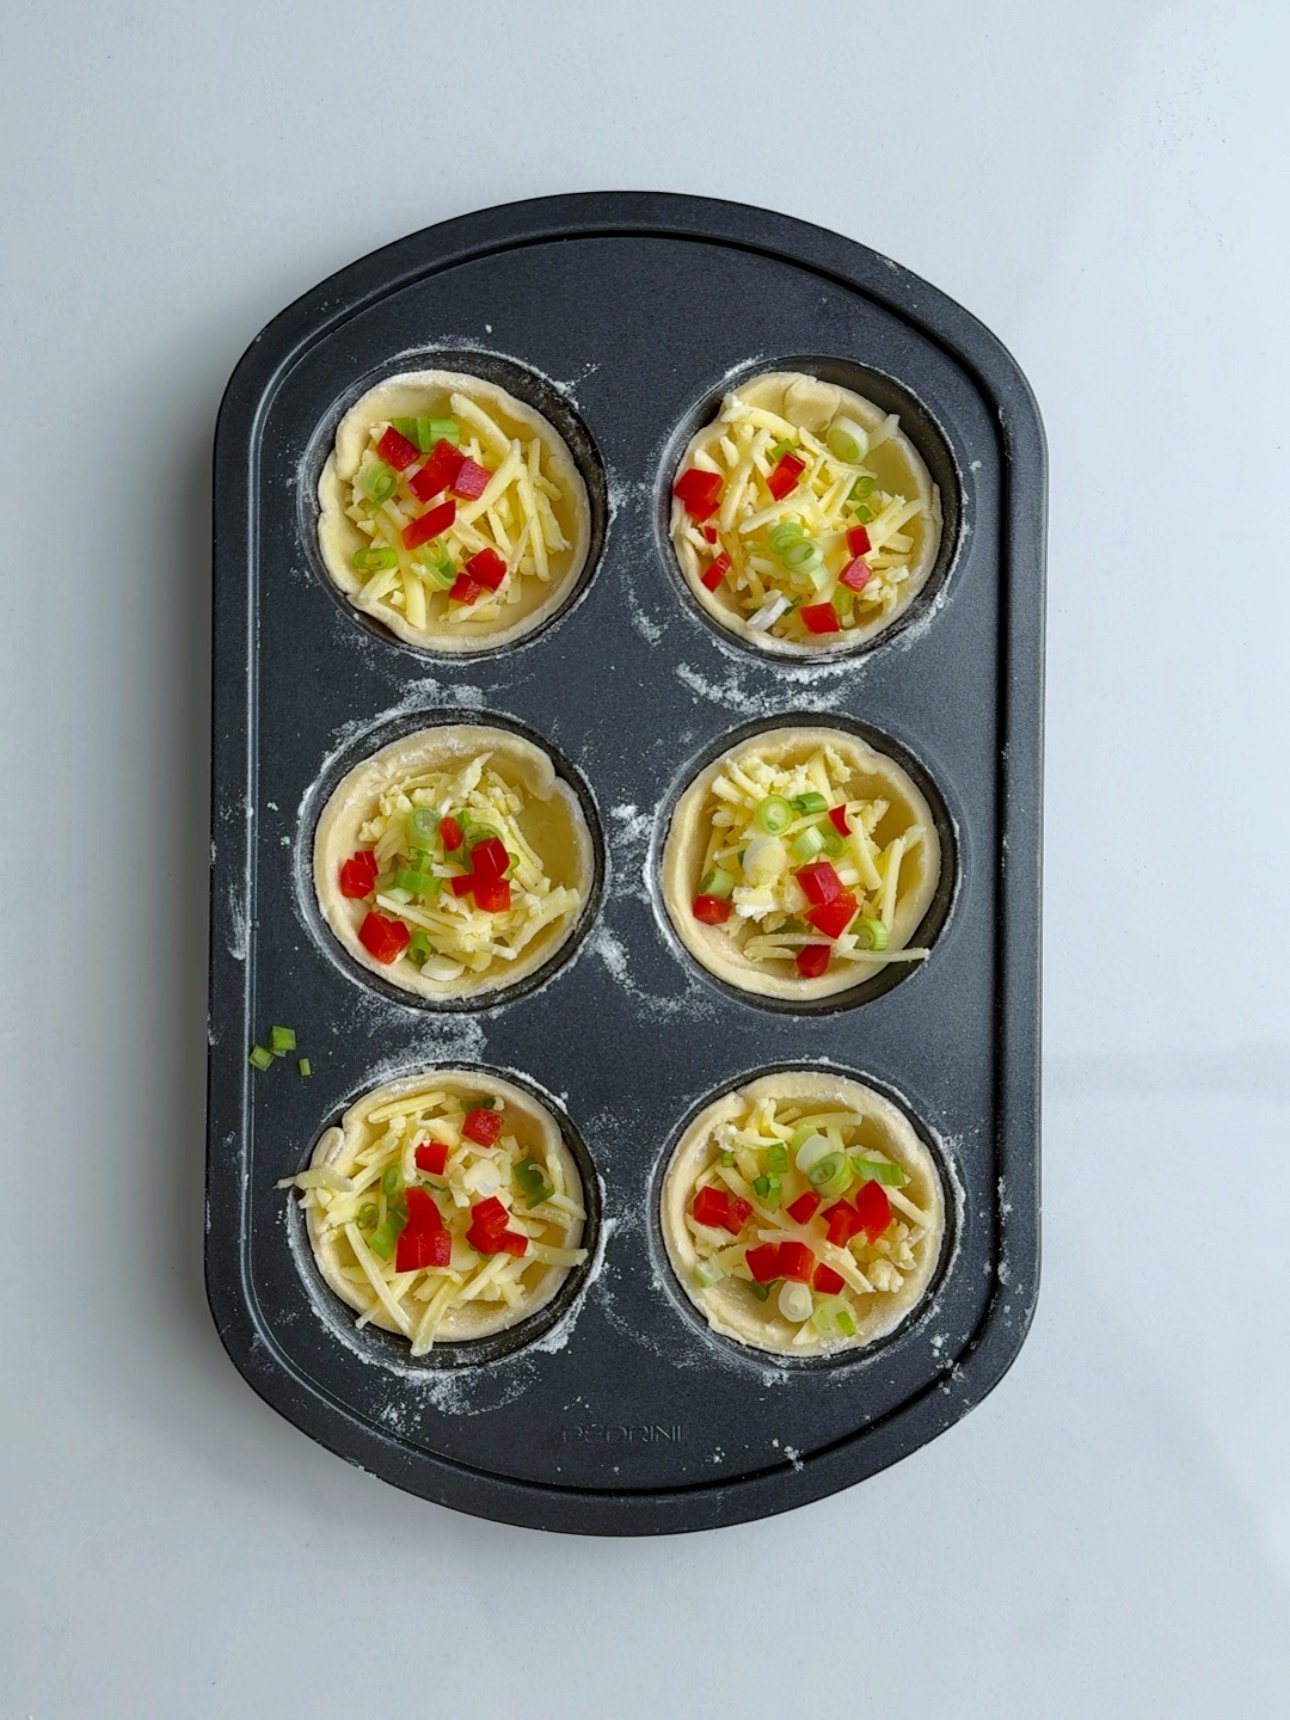 Red bell peppers finely diced, scallions and shredded cheese added to a muffin tin